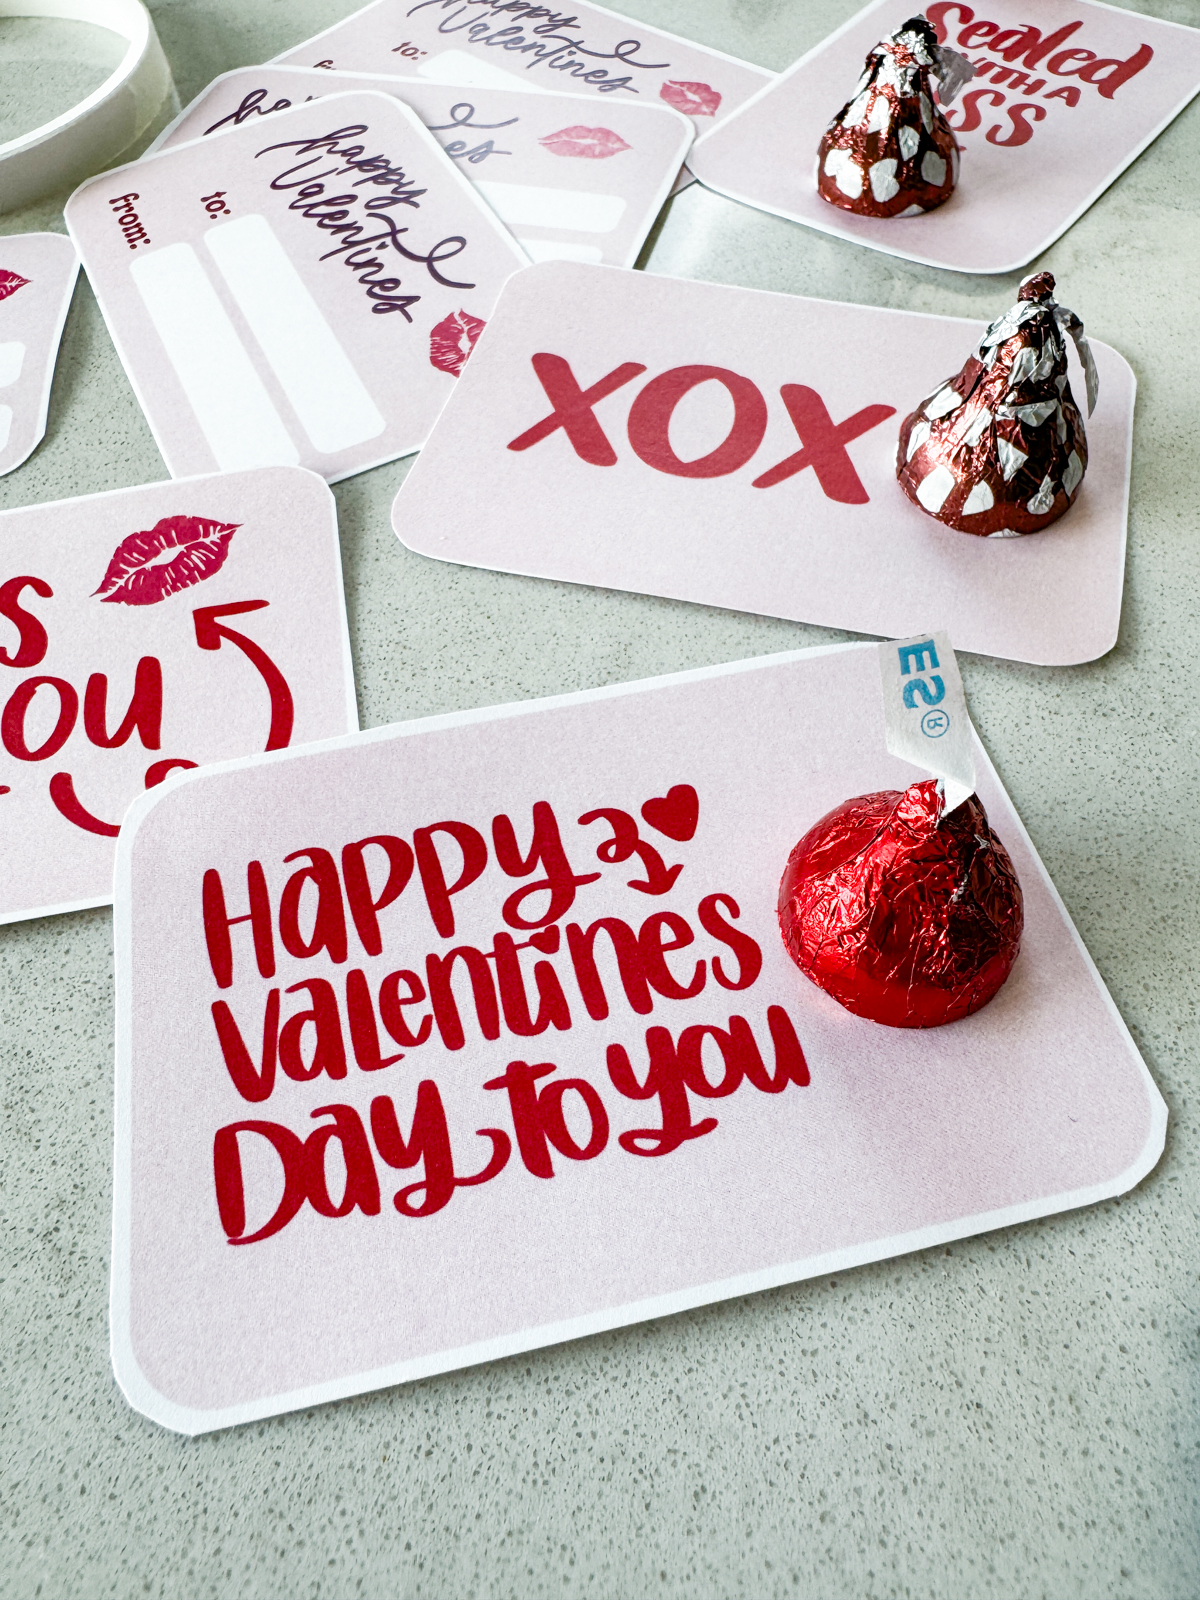 happy valentines day to you free printable valentines cards shown with attached hershey's kisses